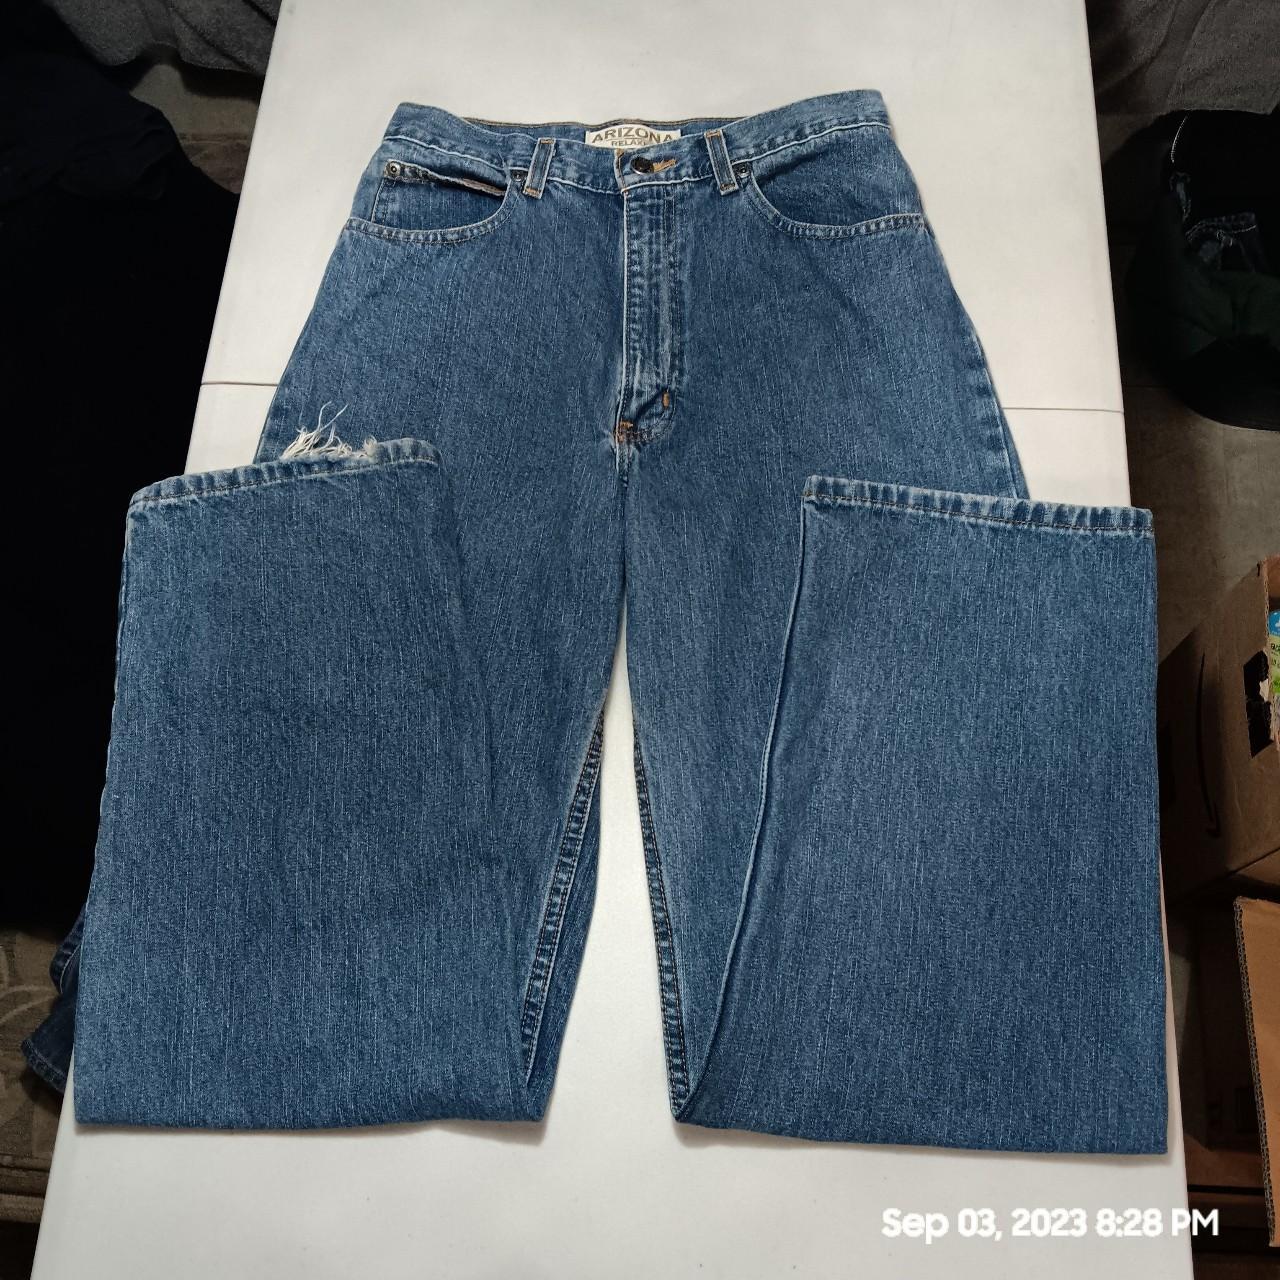 item listed by thriftl